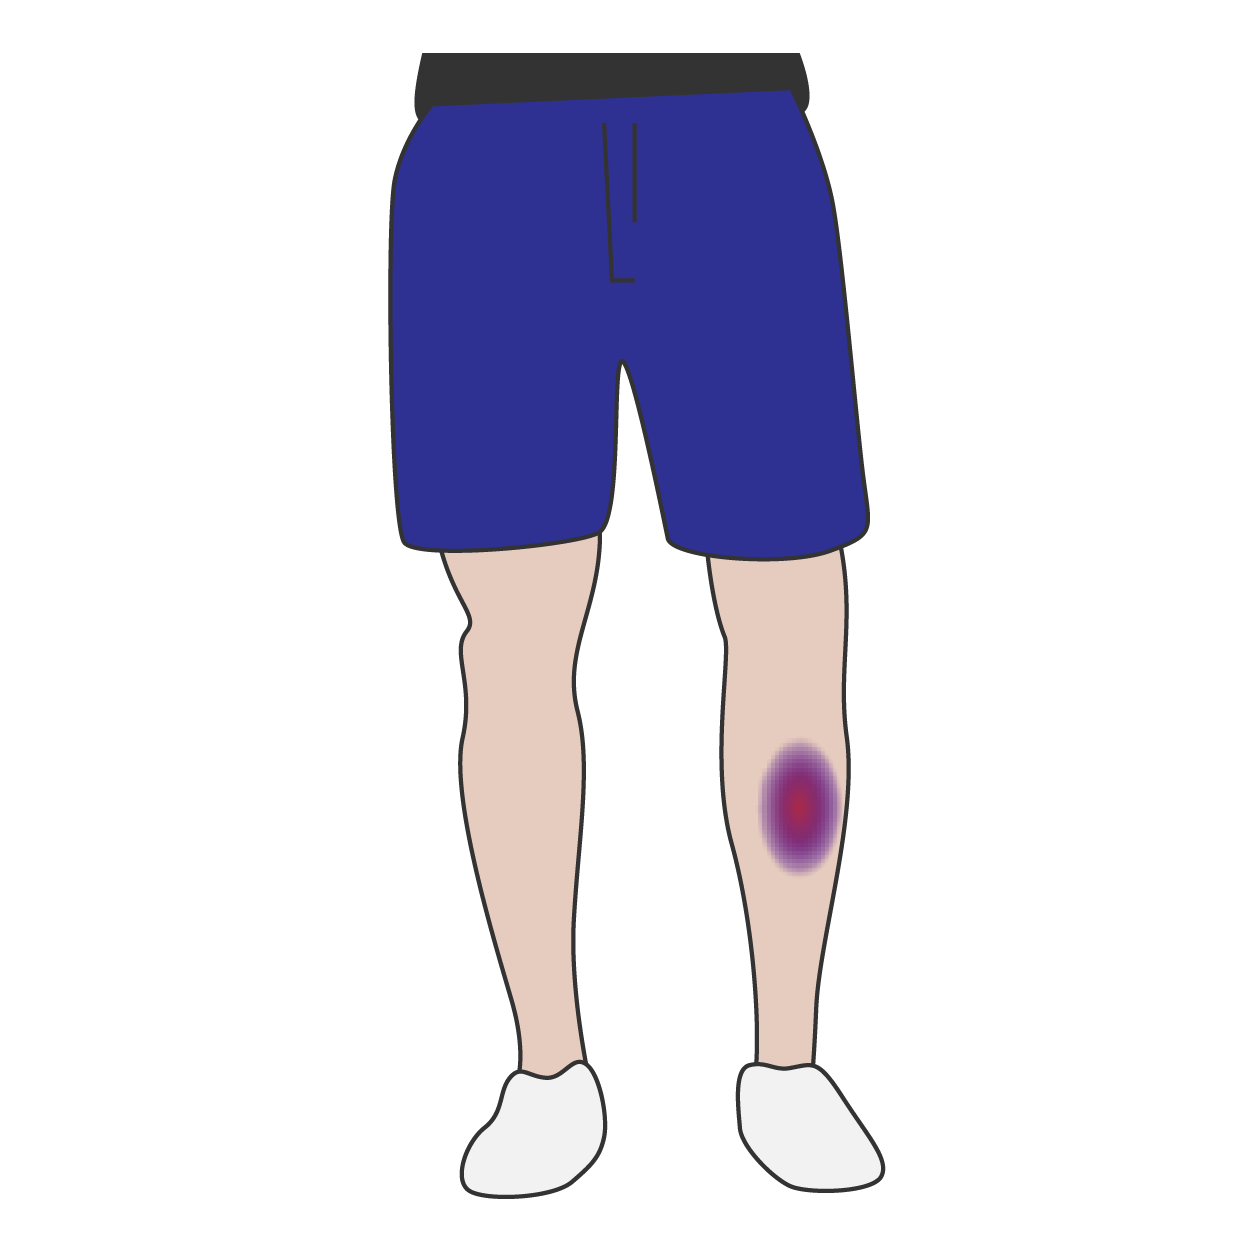 hurt clipart ankle injury